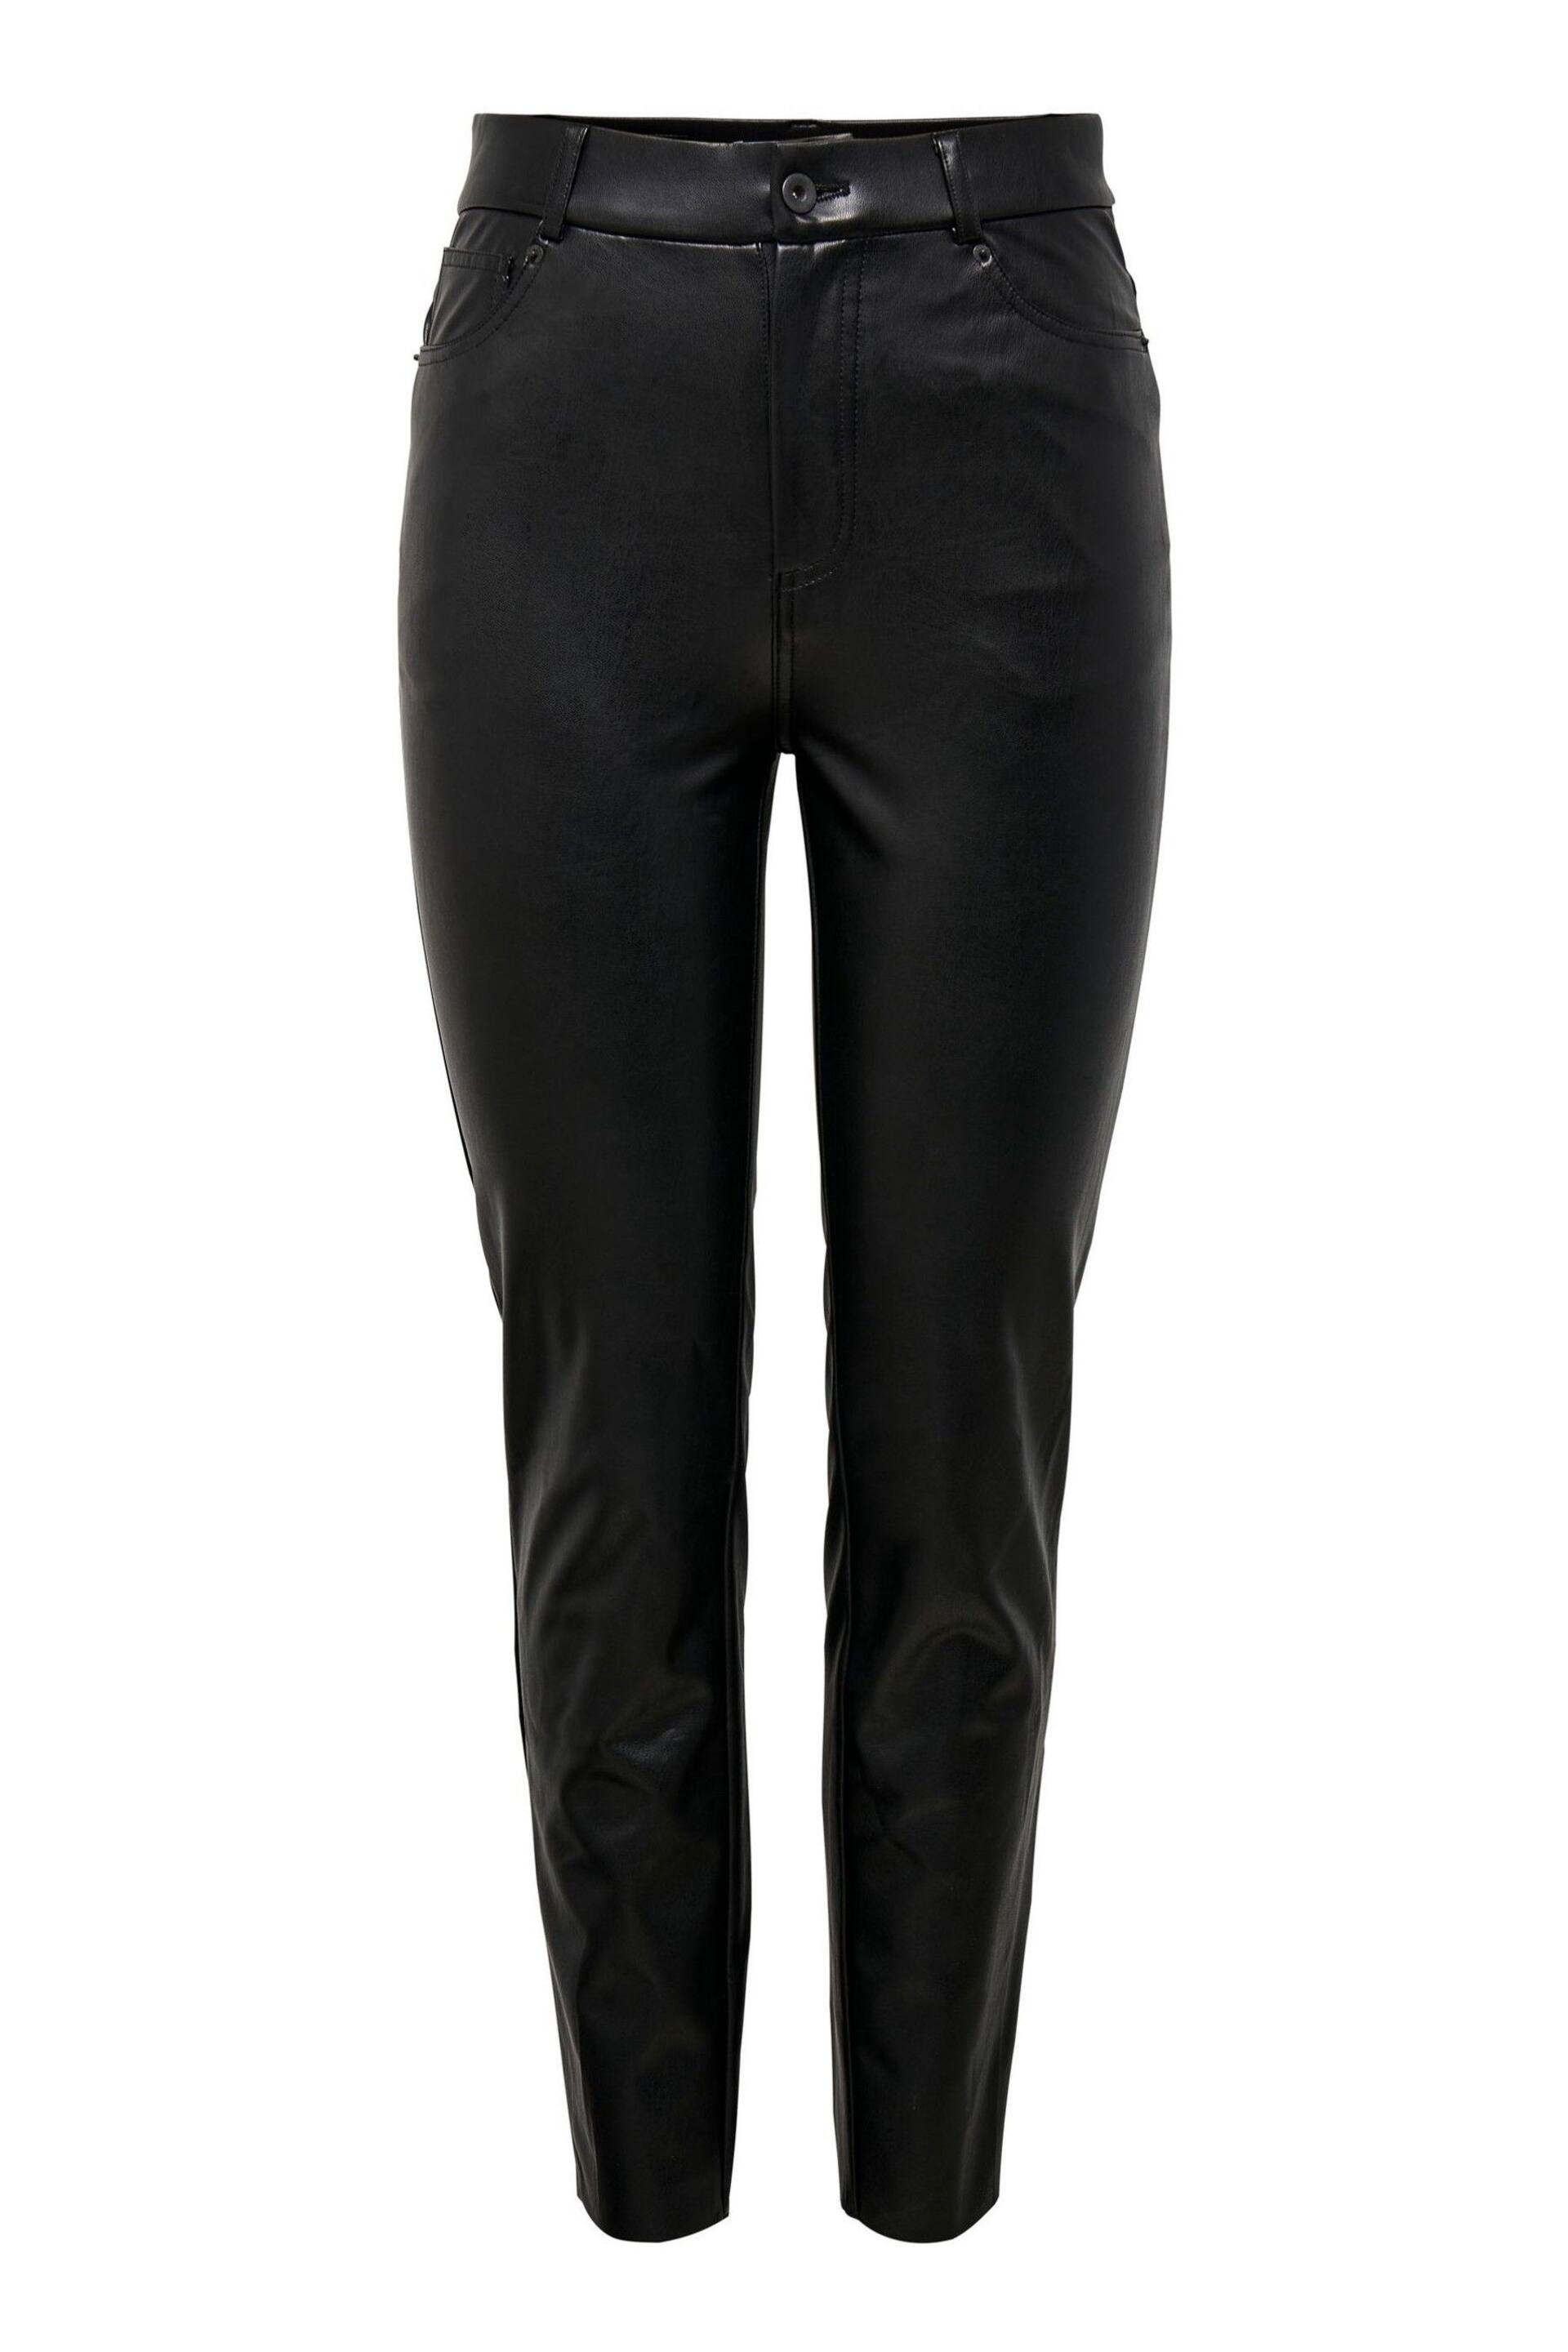 ONLY Black High Waisted Faux Leather Workwear Trousers - Image 3 of 4